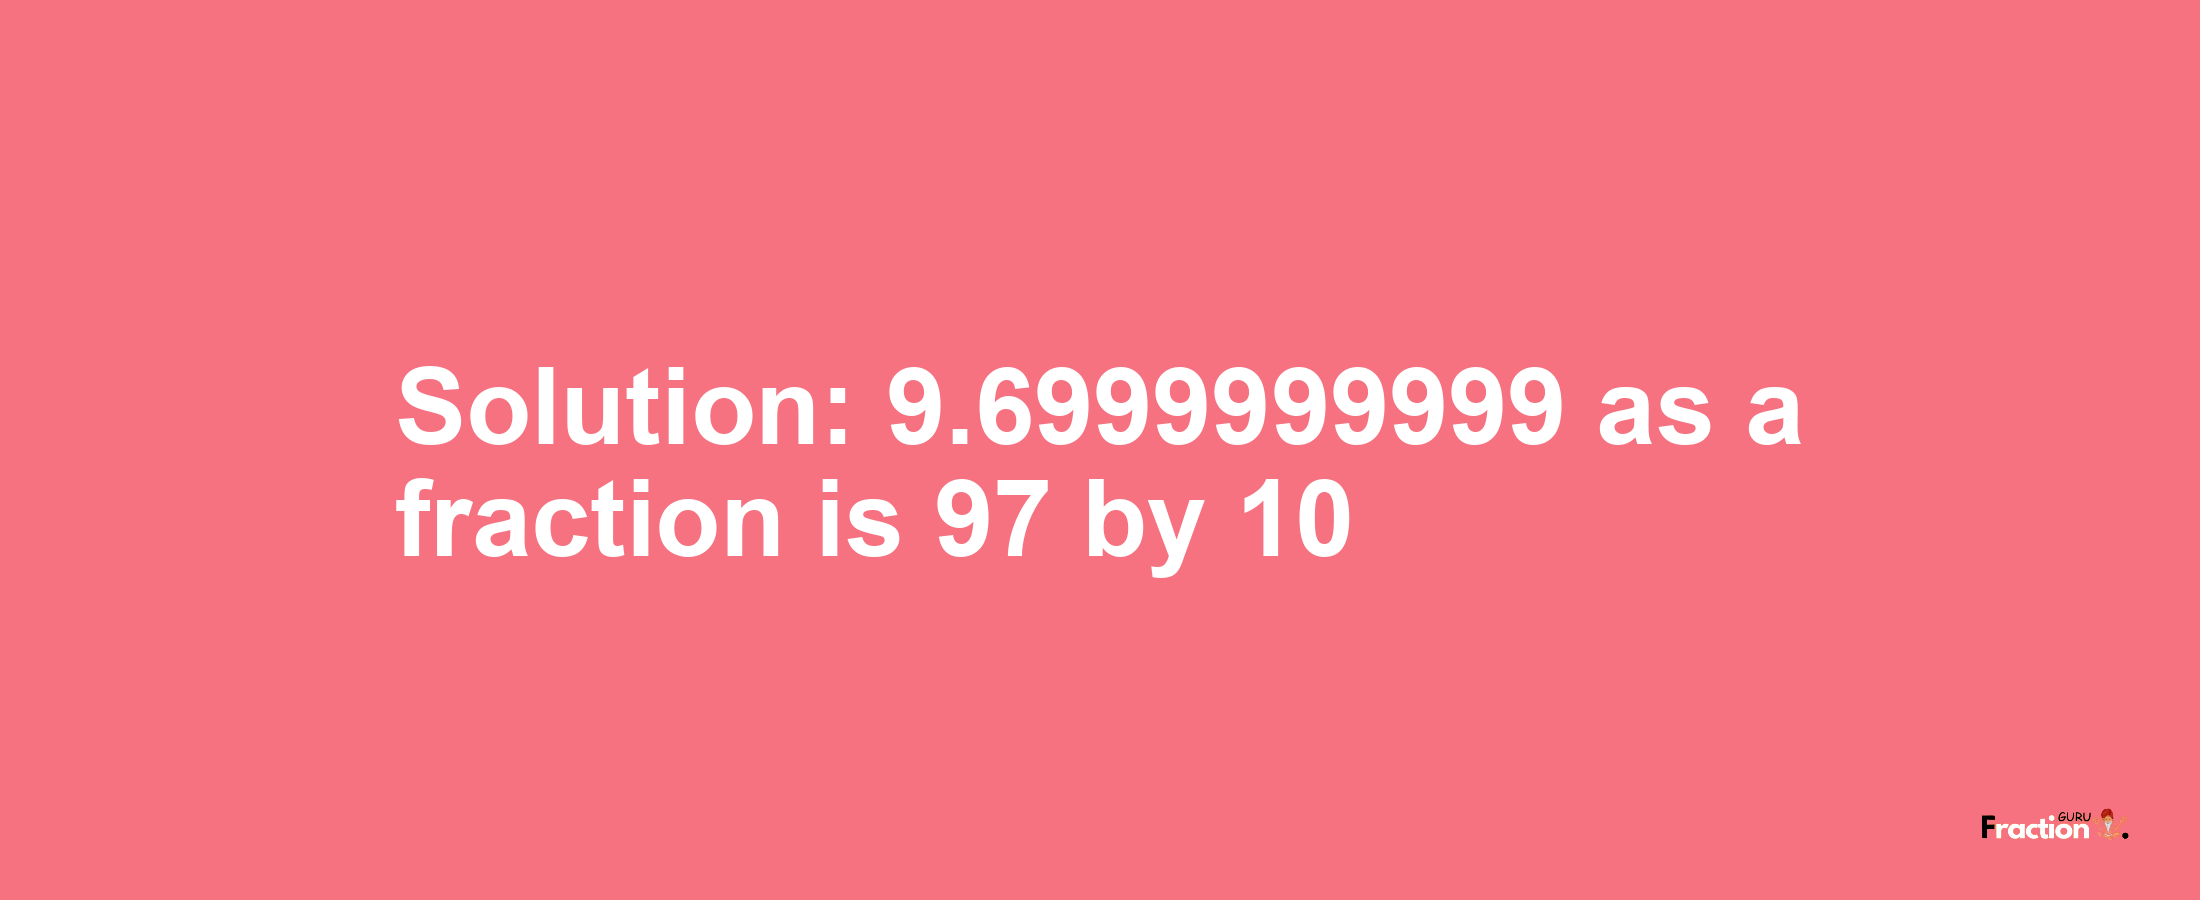 Solution:9.6999999999 as a fraction is 97/10